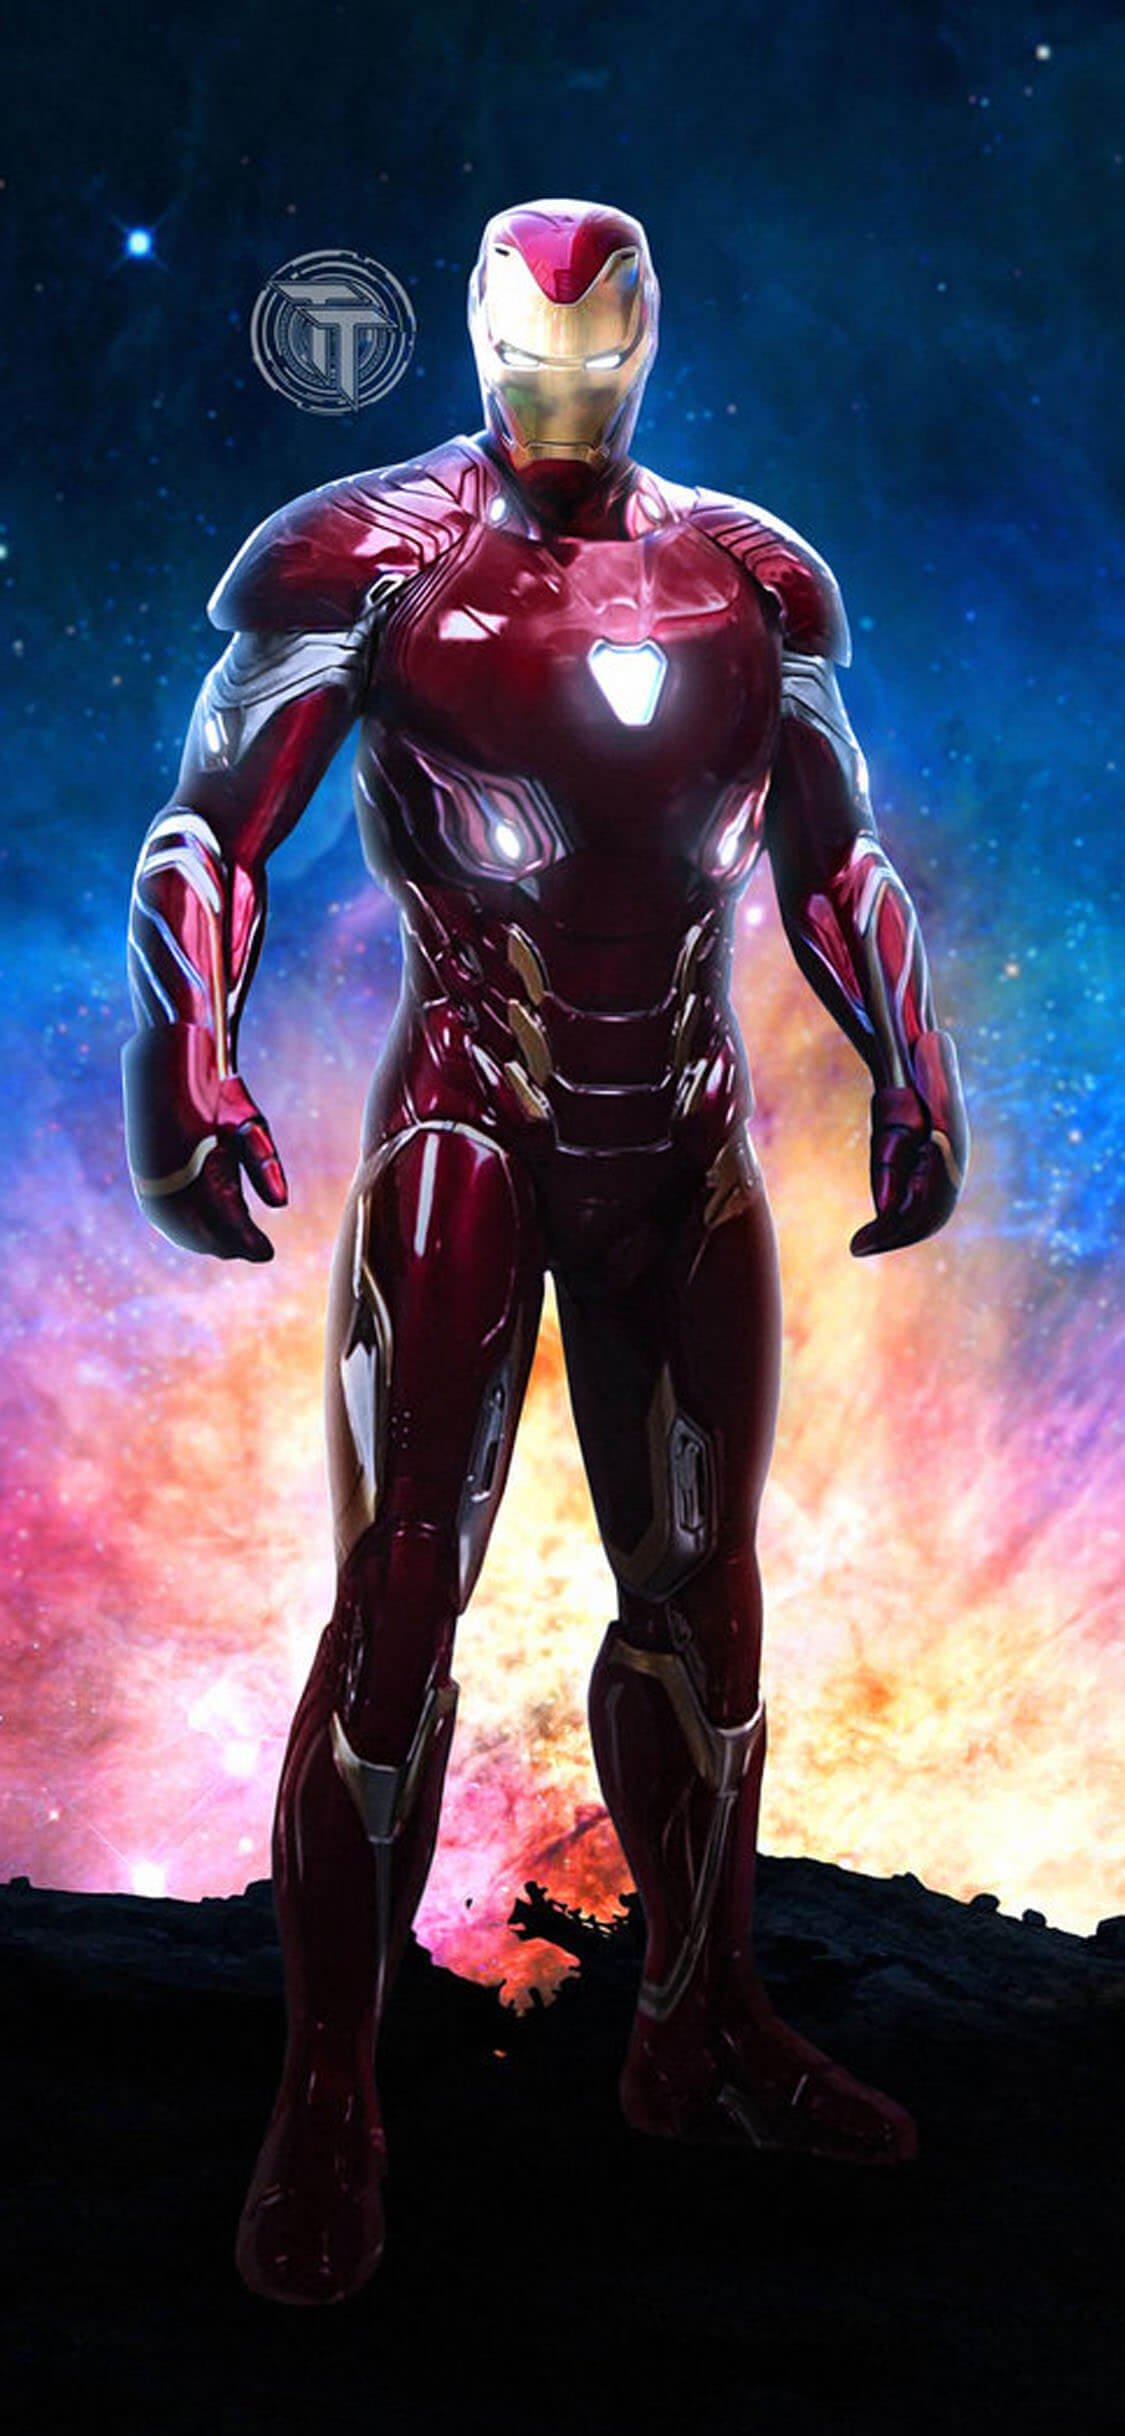 Wallpapers Of Ironman In Hd